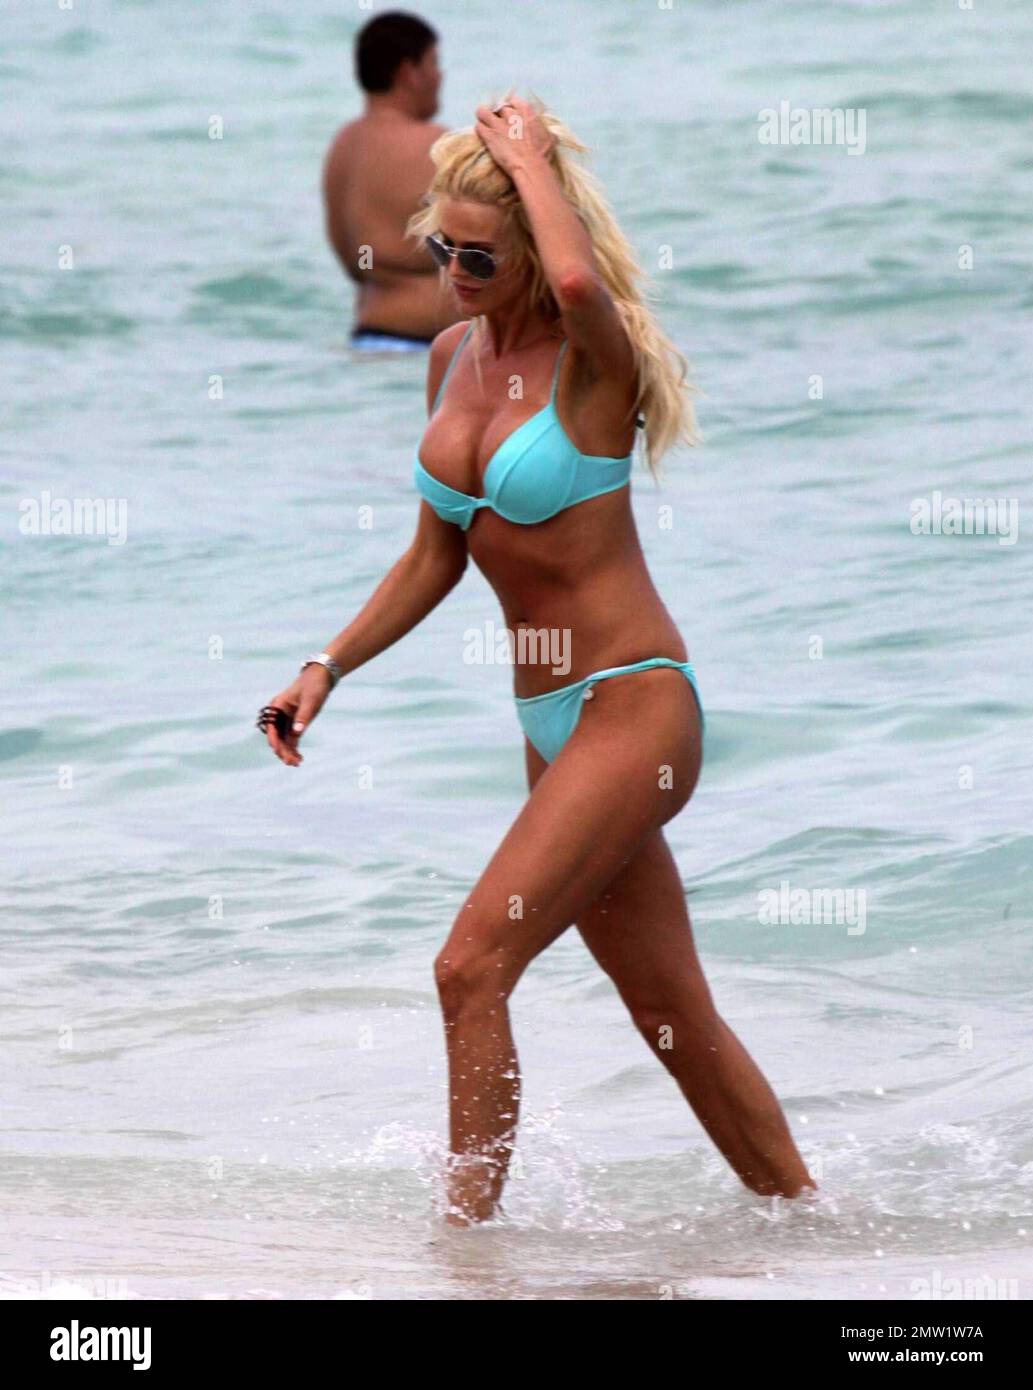 Exclusive!! Victoria Silvstedt looks like she is living up to the name of  her reality show, "My Perfect Life". The former Playboy Playmate flaunted  her perfect form on the beach in a